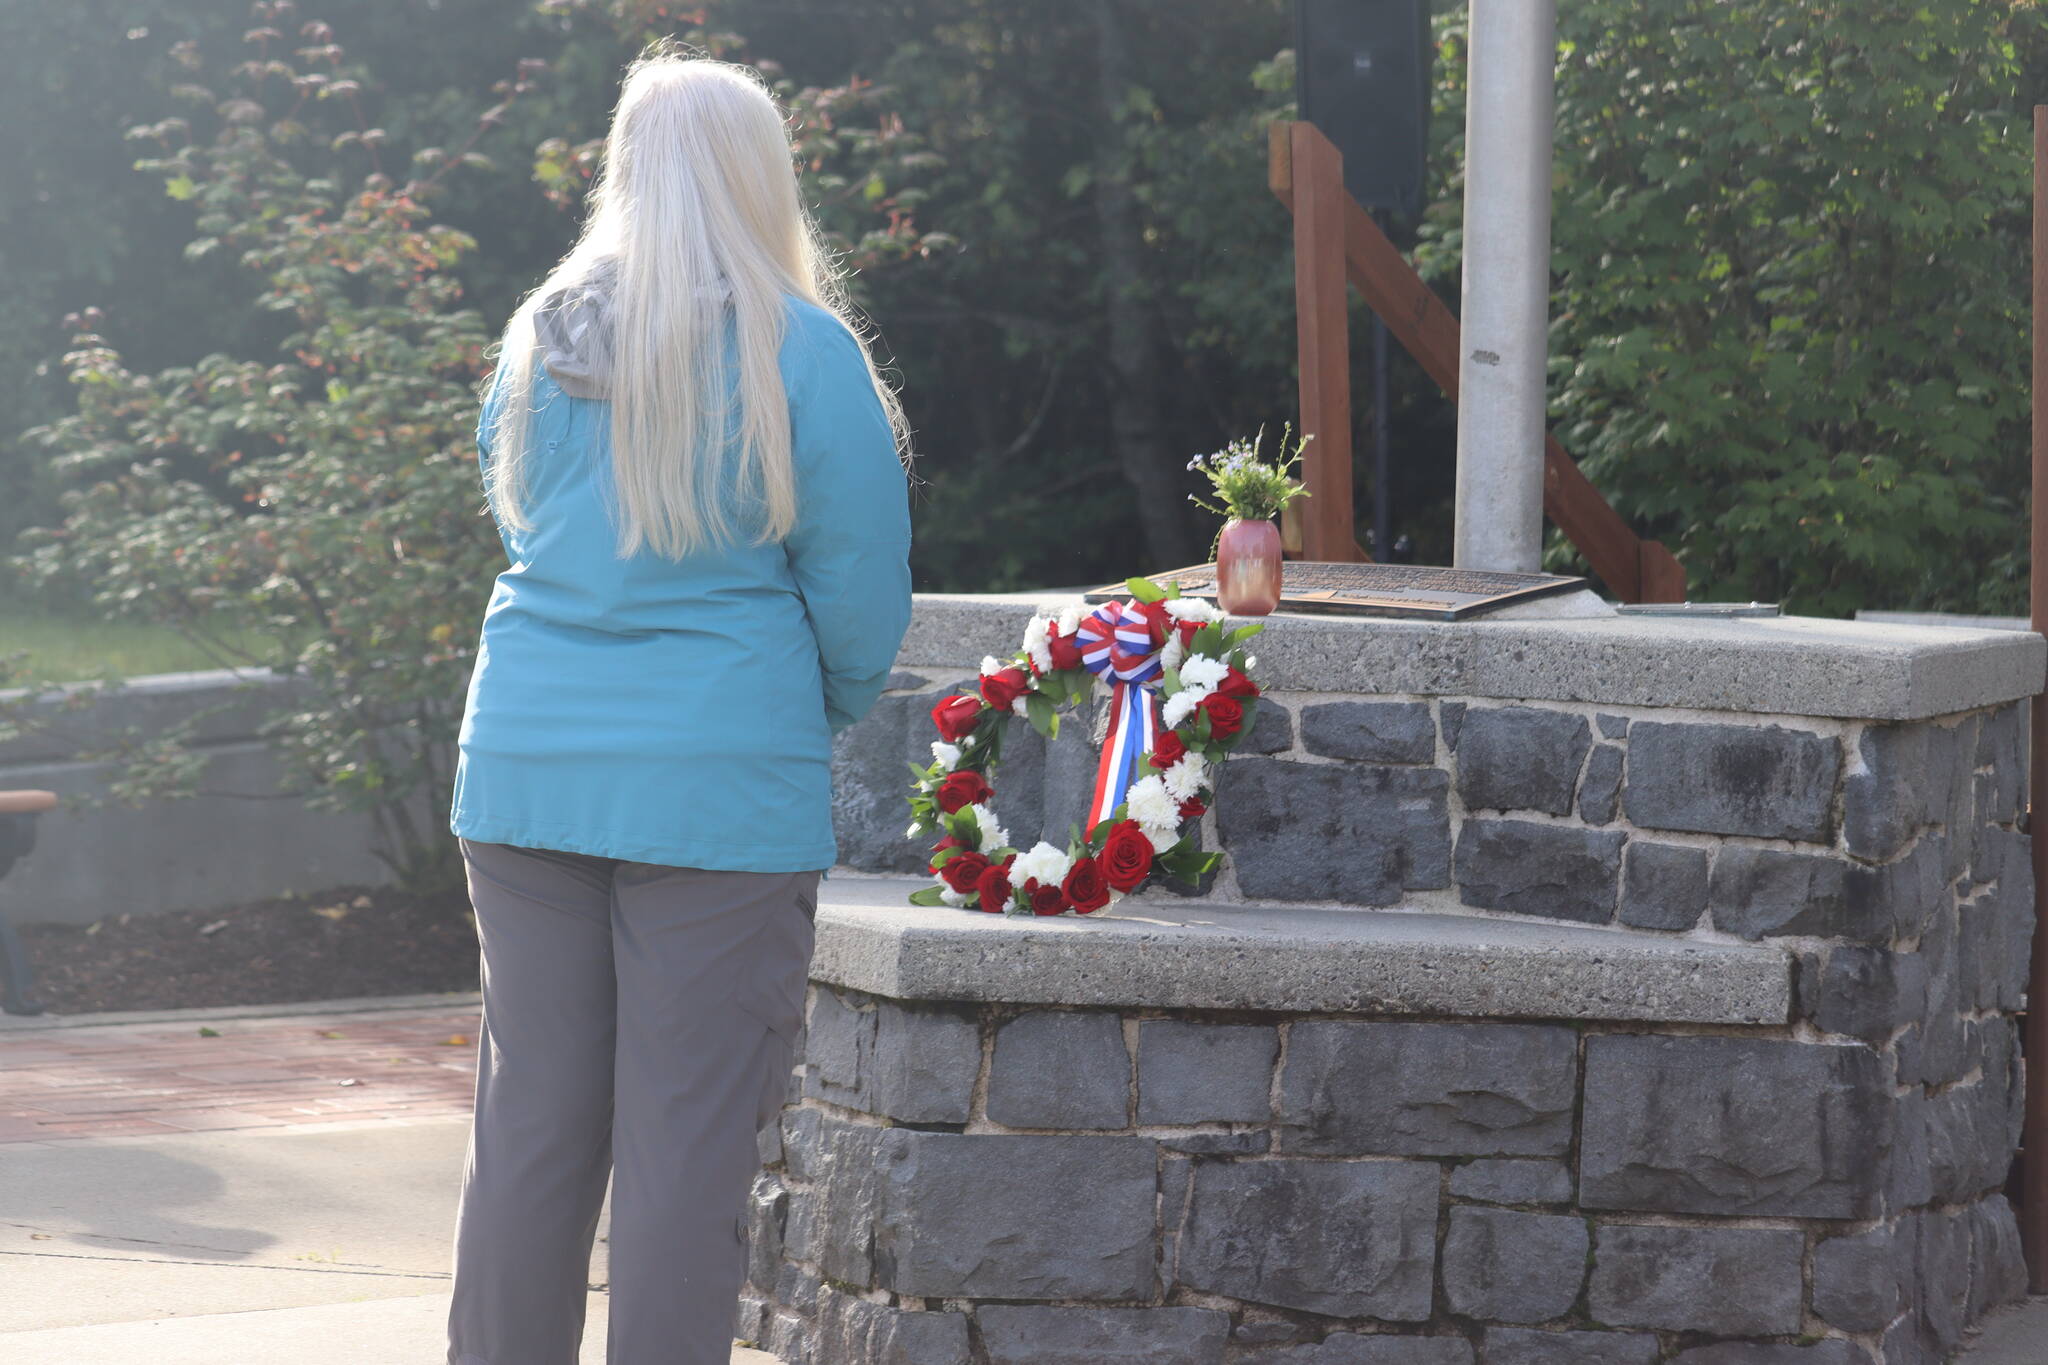 Juneau Deputy Mayor and former EMT Maria Gladziszewski laid a wreath at the memorial during Sunday’s ceremony as a way of paying tribute to those who lost their lives during the events of Sept. 11, 2001. (Jonson Kuhn / Juneau Empire)